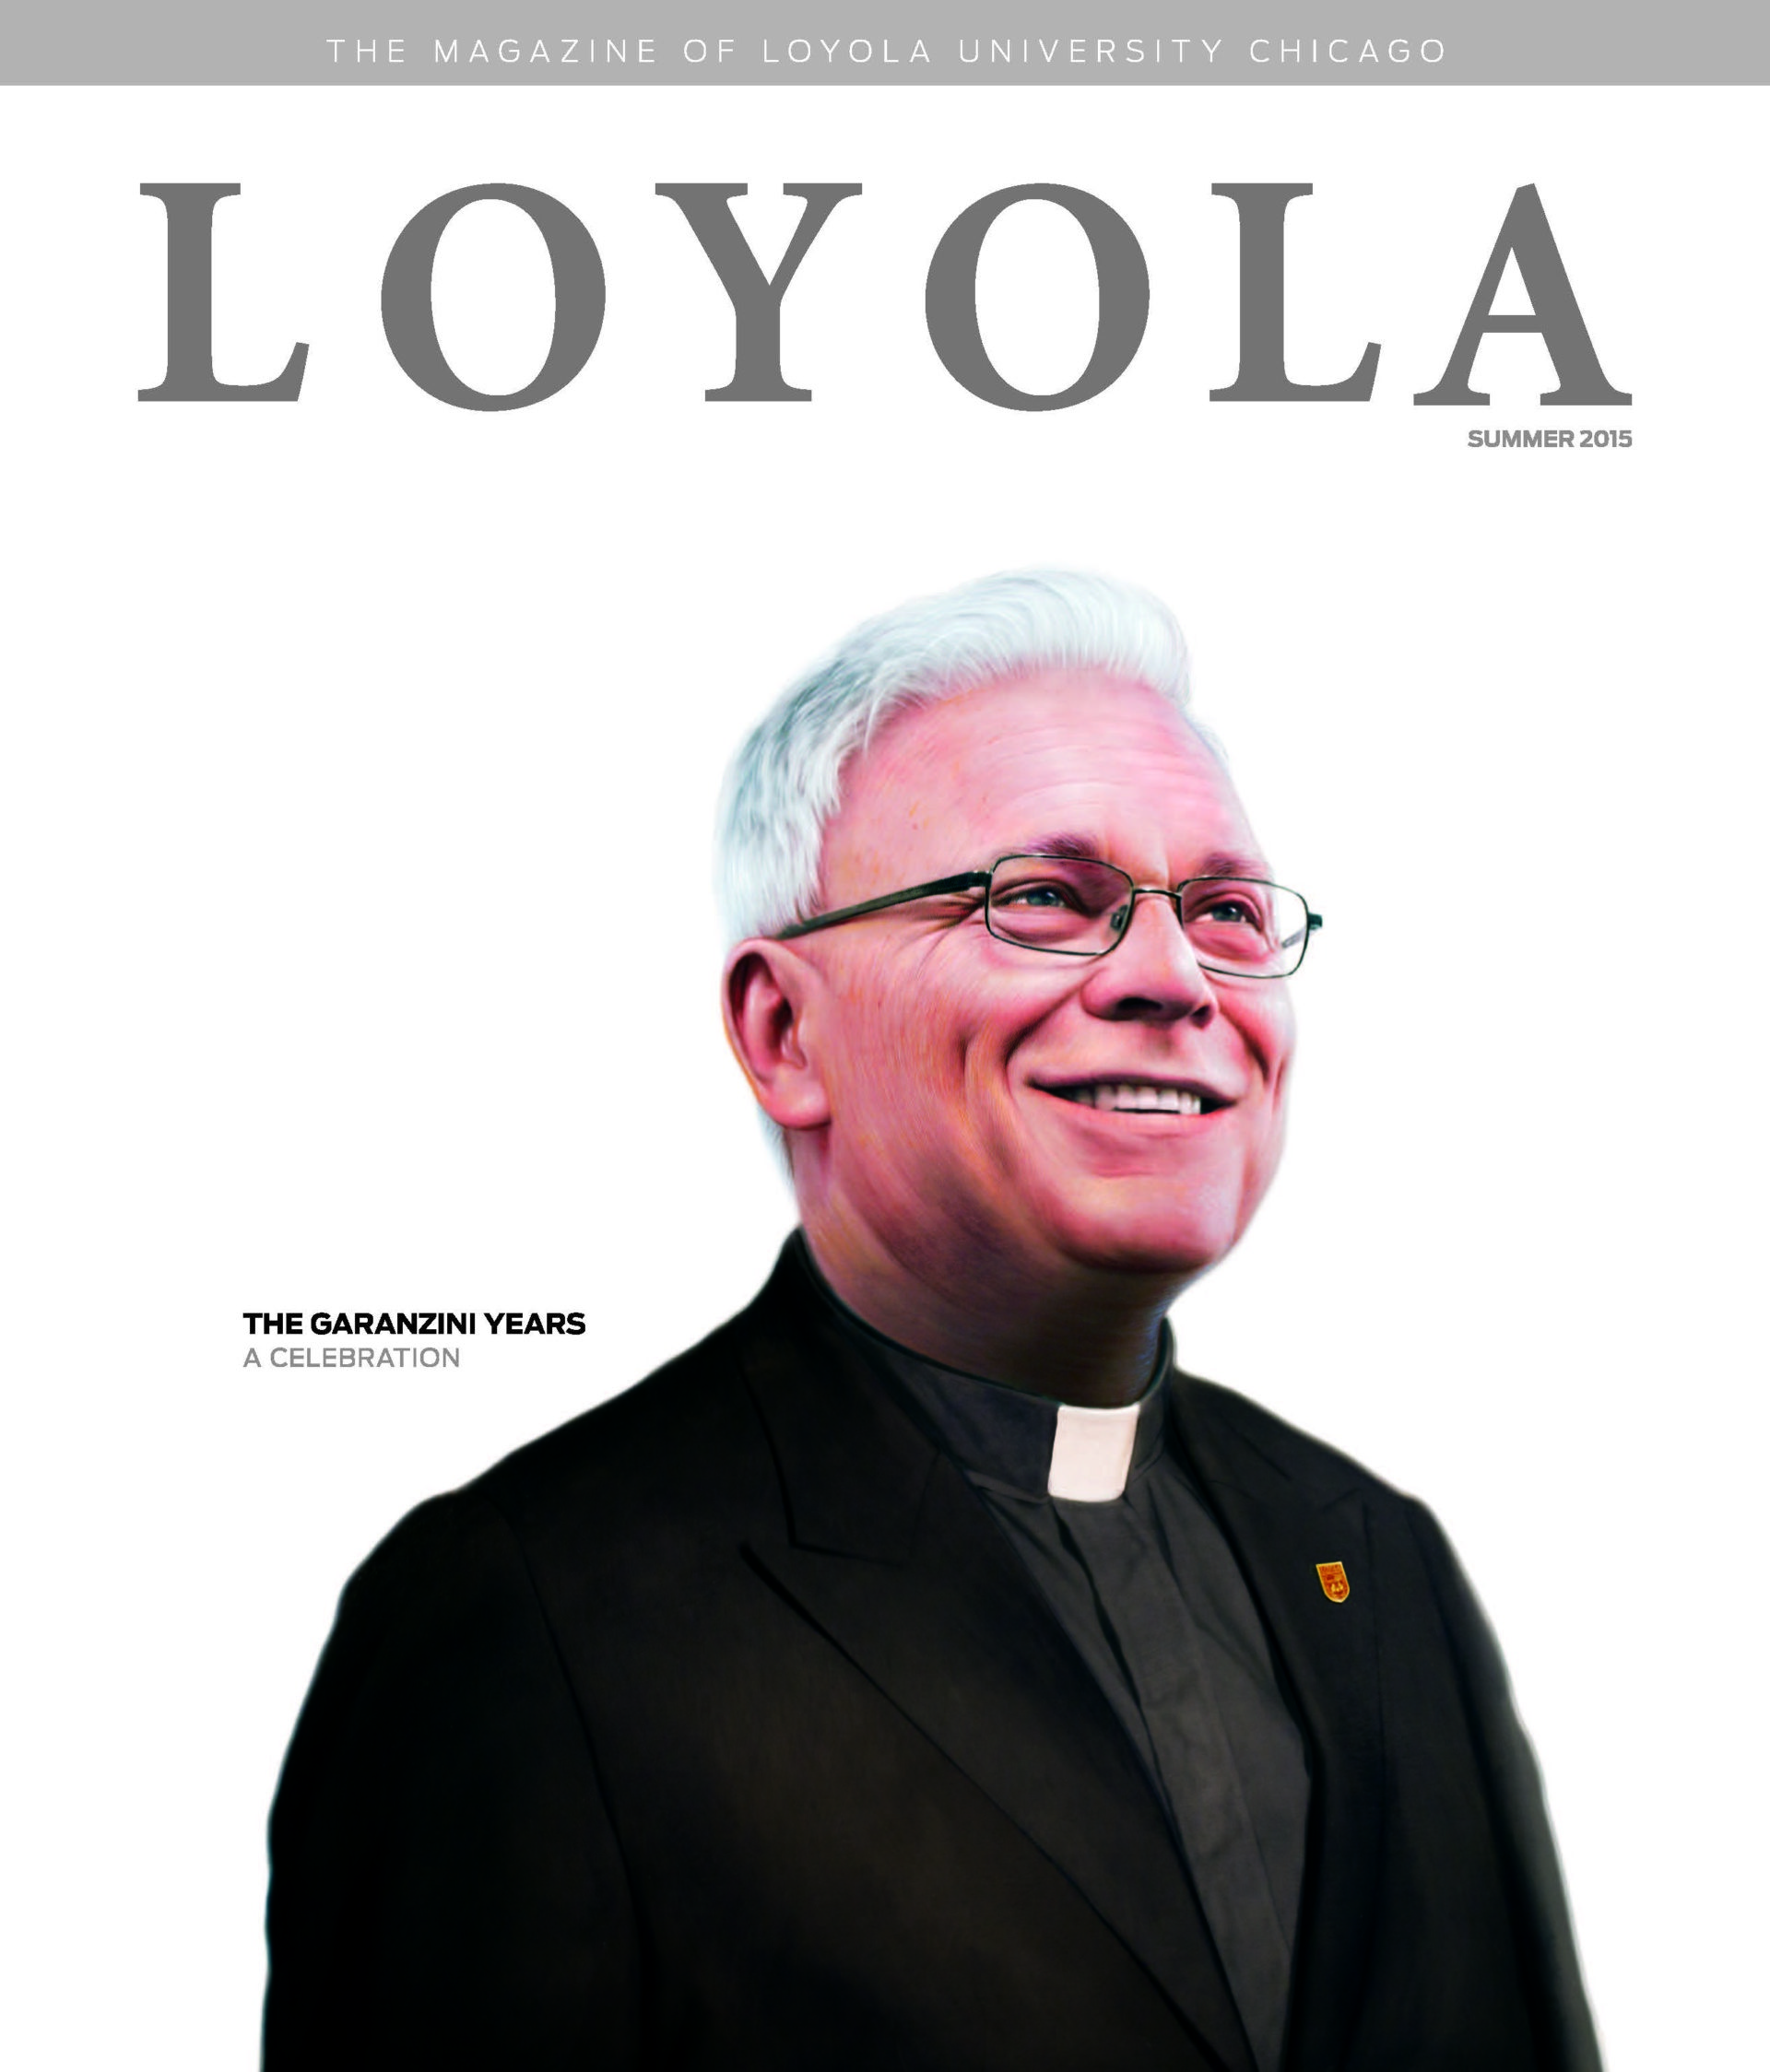 The summer 2015 Loyola magazine cover with a smiling man wearing a Loyola pin on his jacket and the headline 